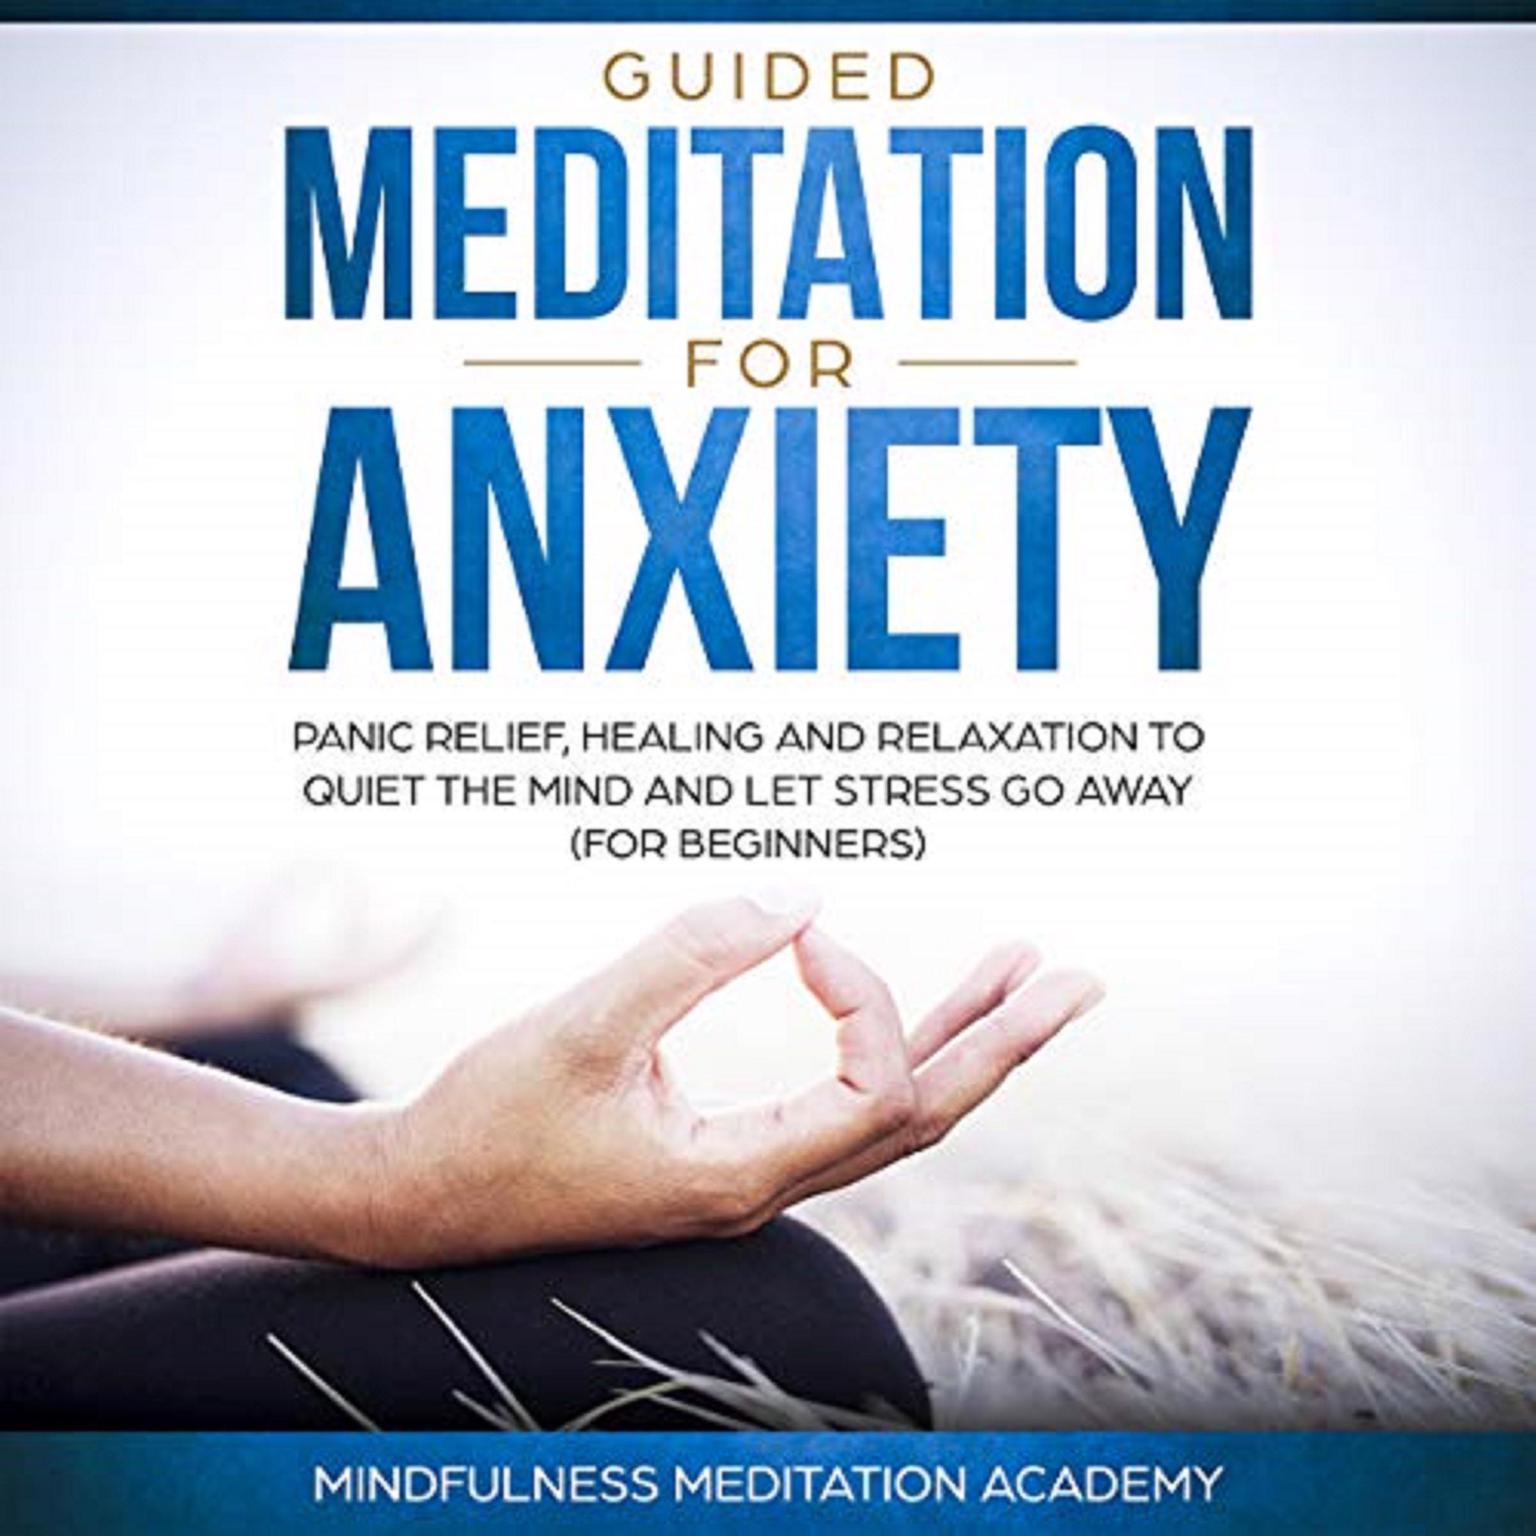 Guided Meditation for Anxiety, Panic Relief, Healing and Relaxation to Quiet the Mind and let Stress go Away Audiobook, by Mindfulness Meditation Academy